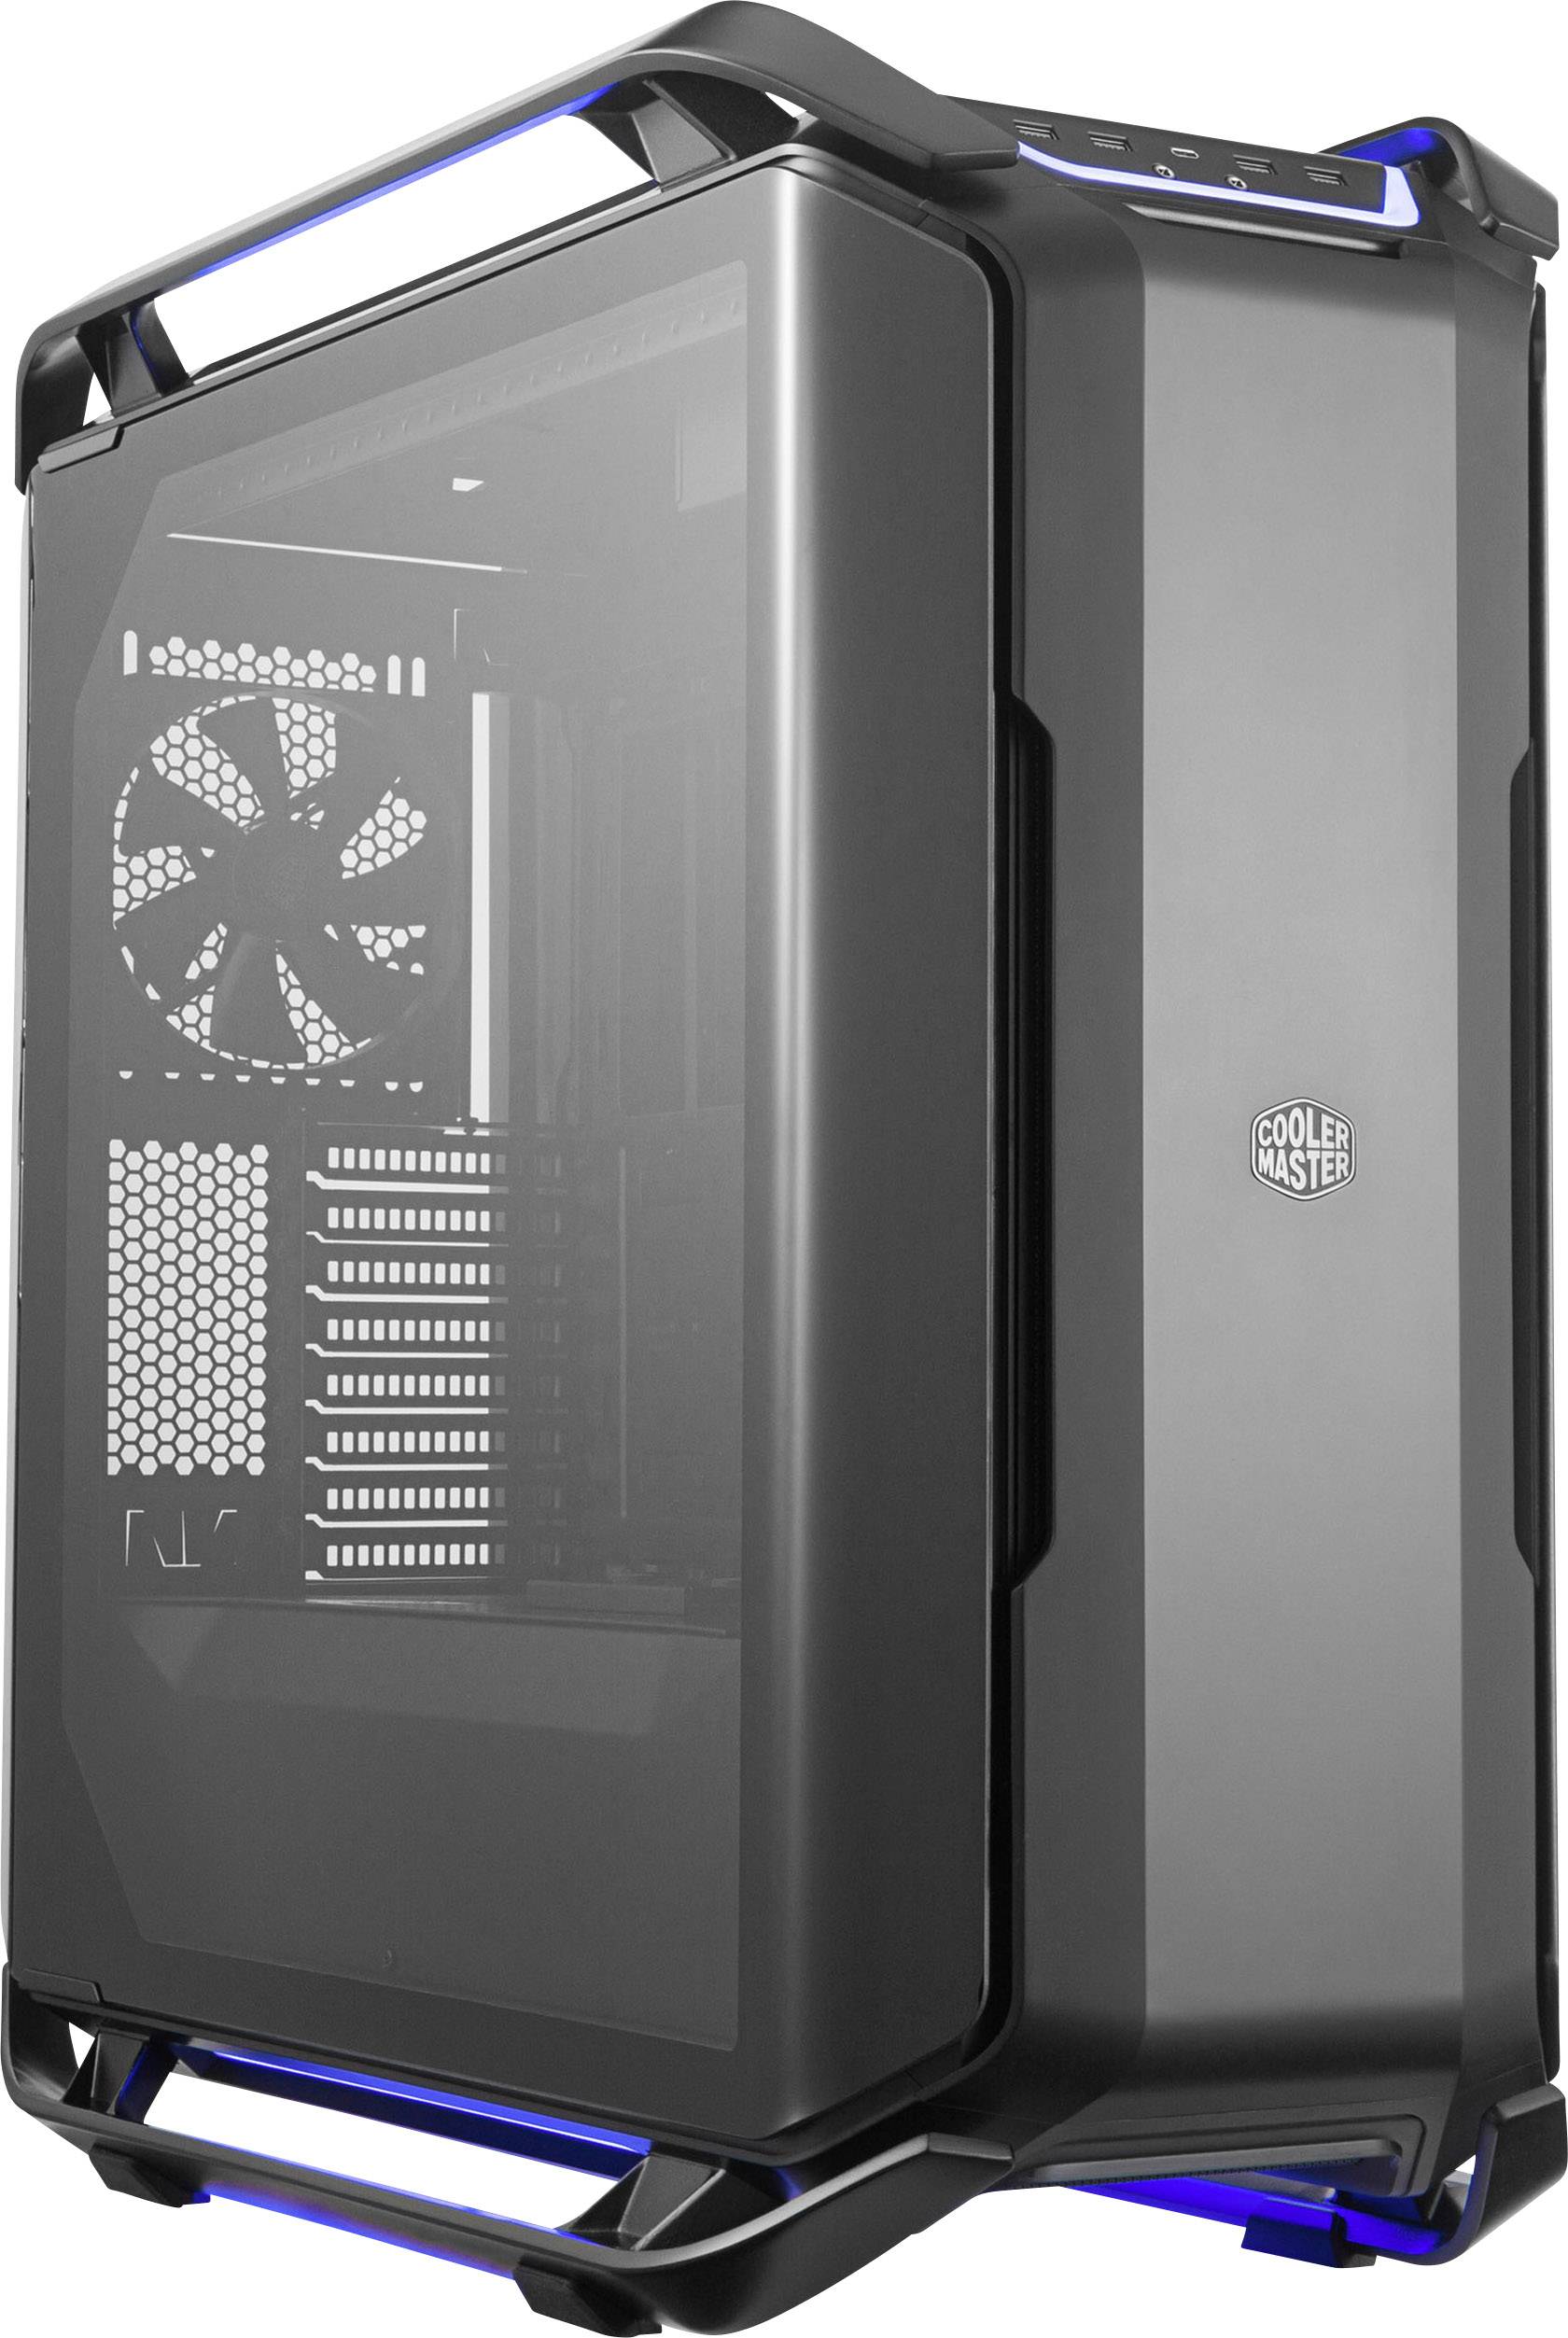 Cooler Master Cosmos C700p Full Tower Pc Casing Black Silver 3 Built In Fans Window Dust Filter Conrad Com